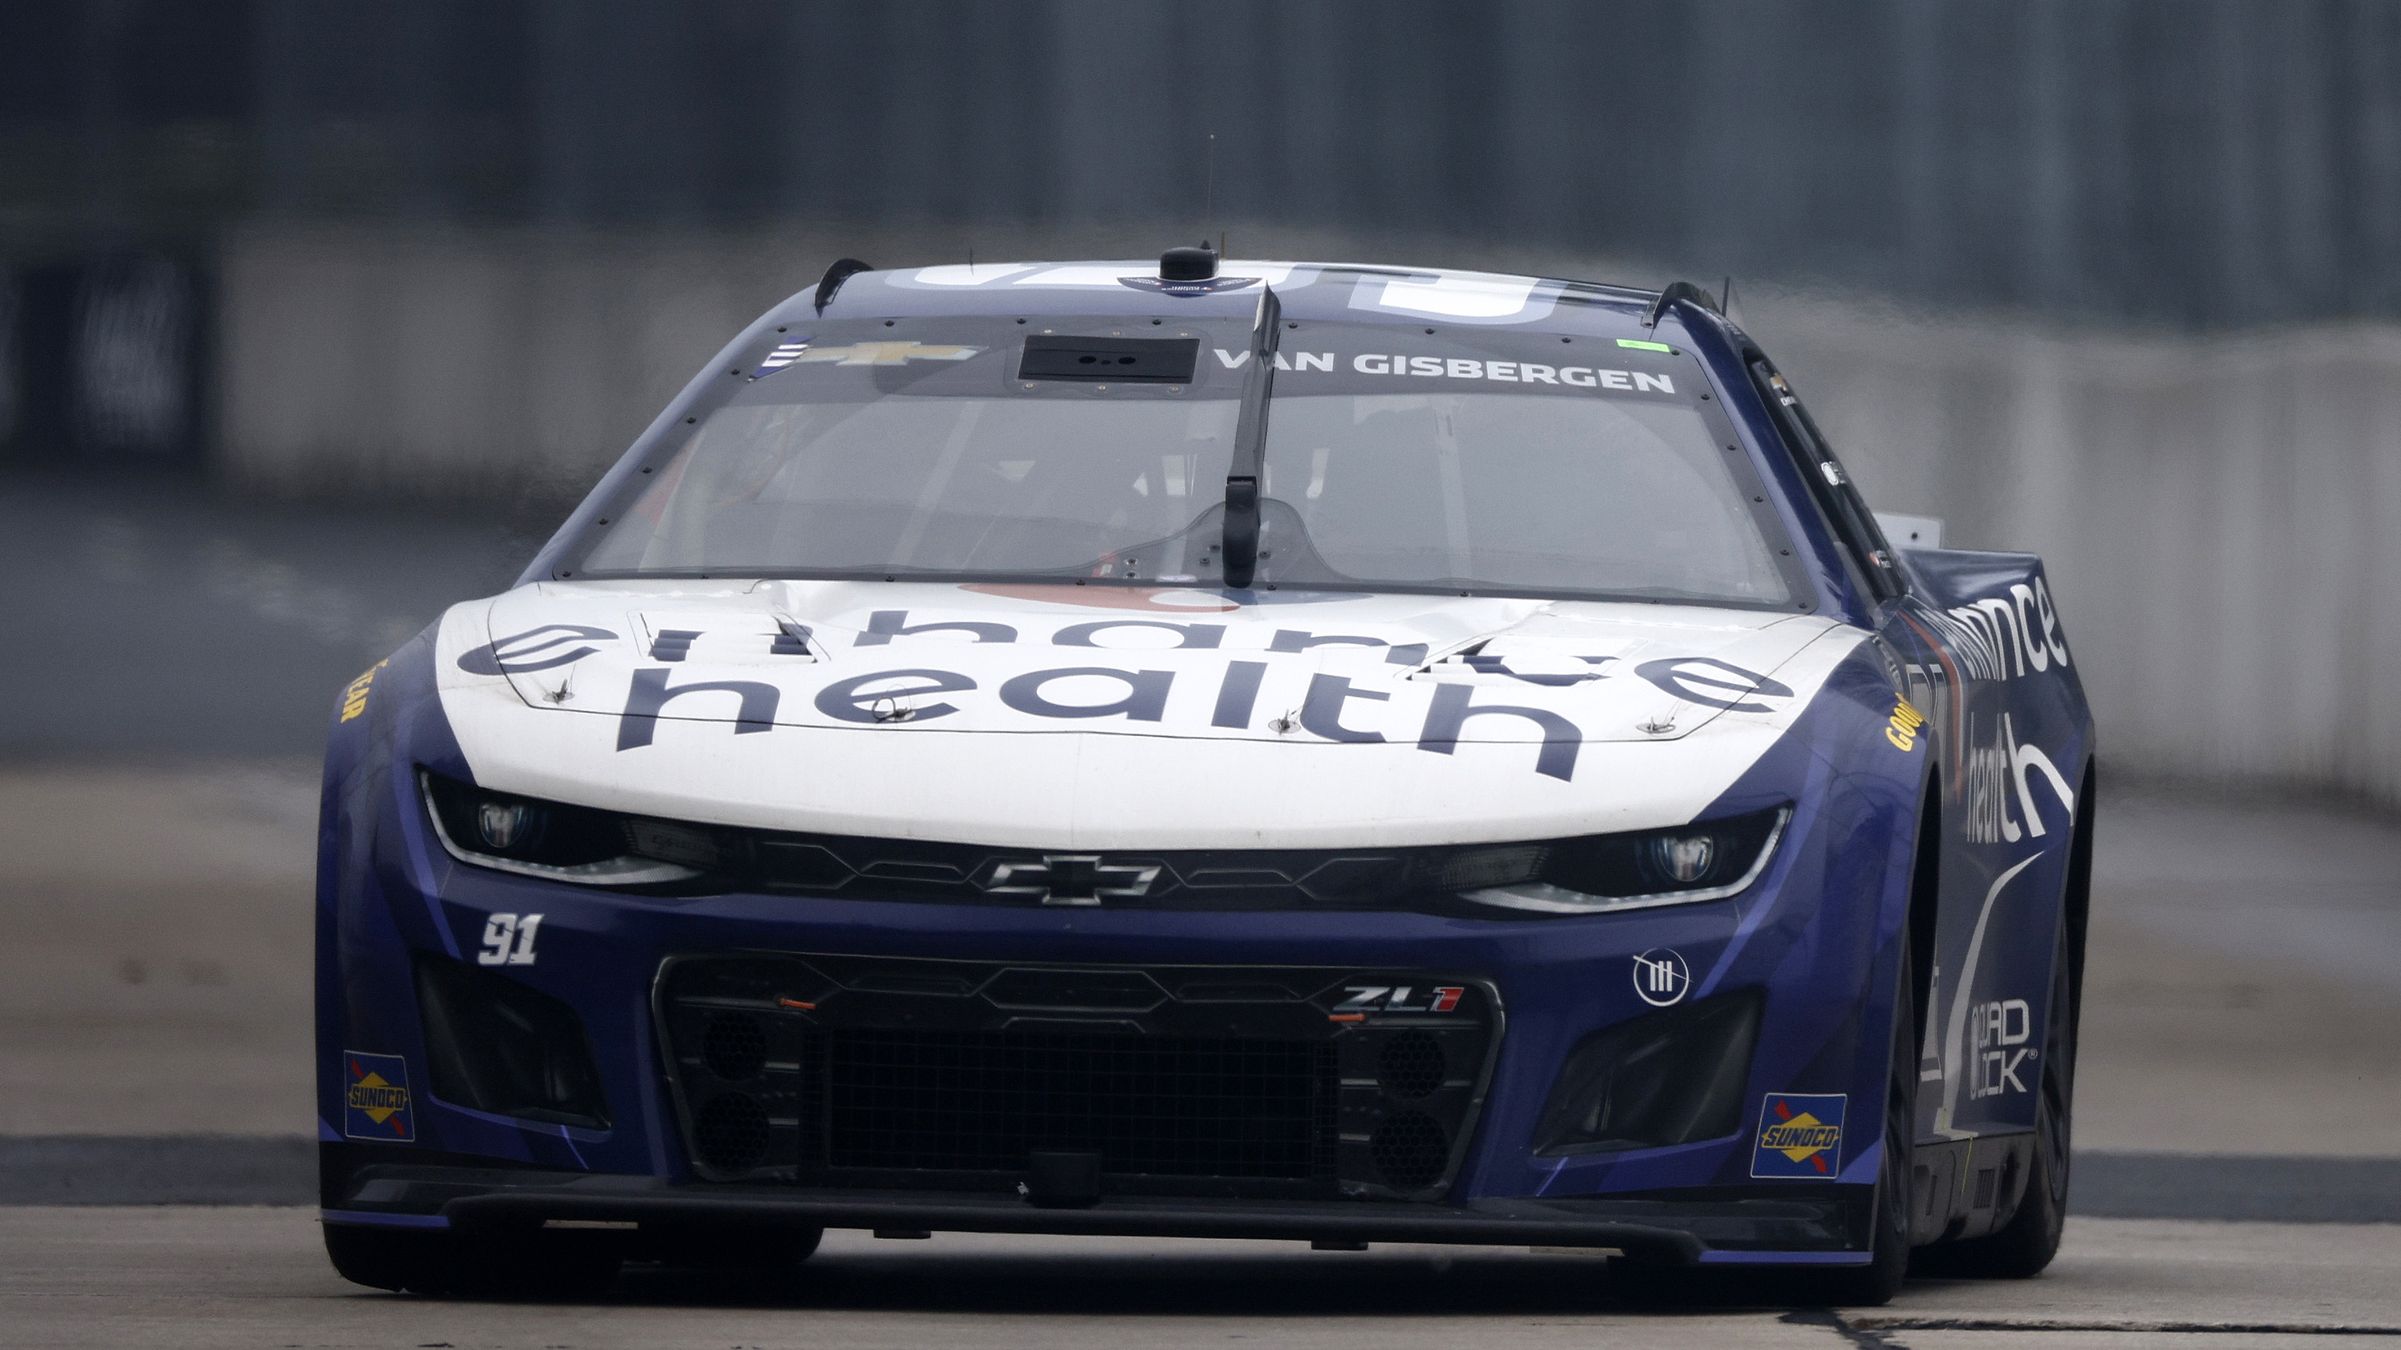 Shane Van Gisbergen, driver of the #91 Chevrolet Camaro, during the NASCAR Cup Series at the Chicago Street Course.